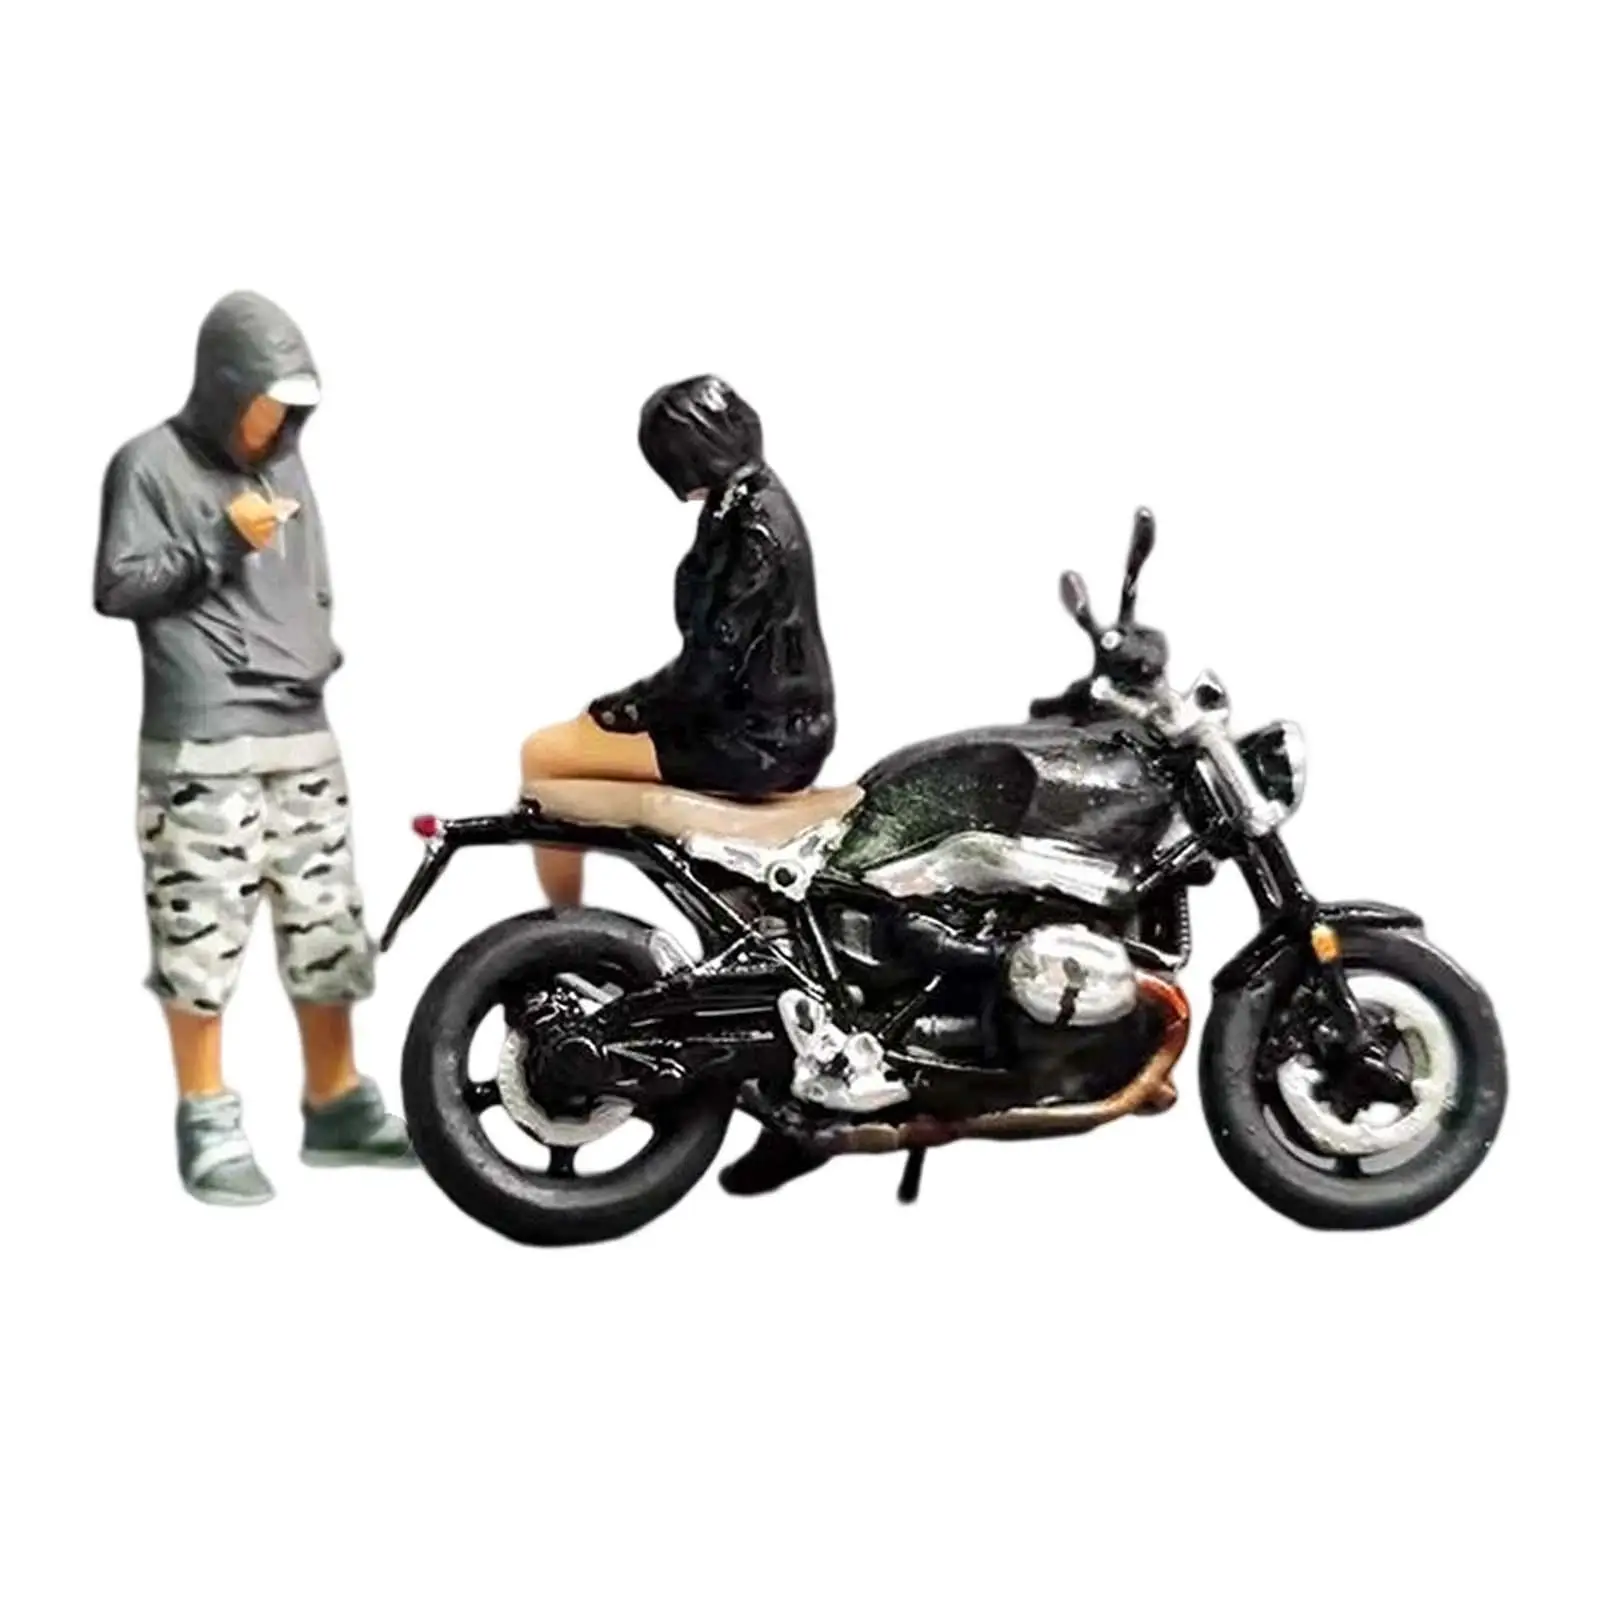 1/64 Figures Motorcycle Resin Doll Architecture Model Desktop Ornament Layout